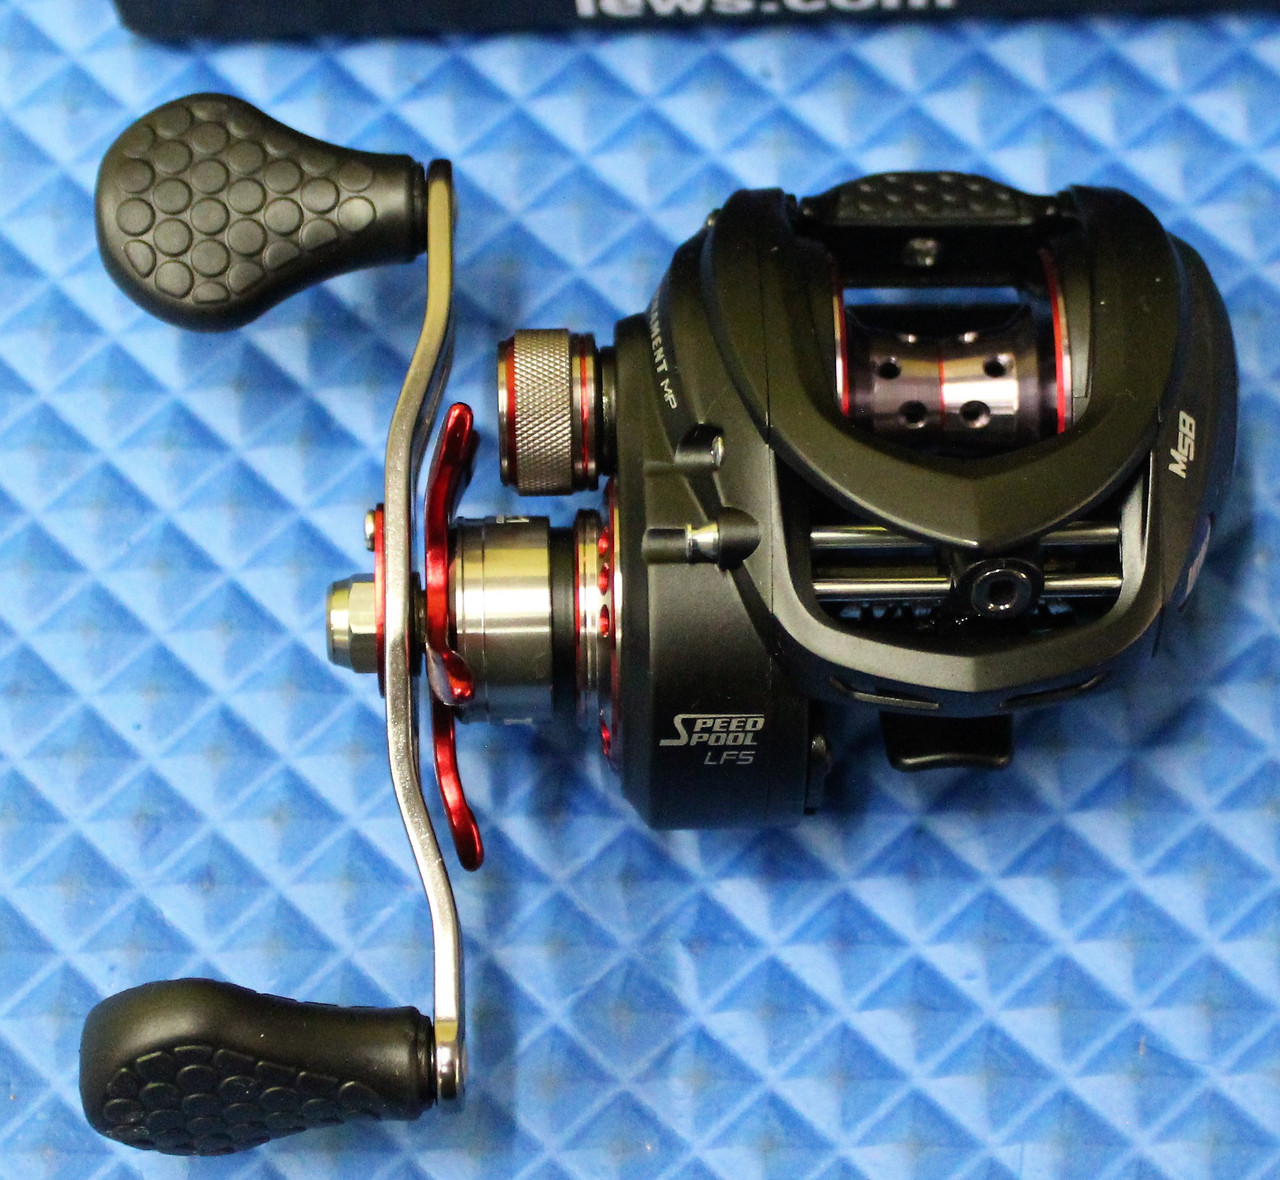 Lews Speed Spool LFS Tournament MB Review--(With Fish Catches